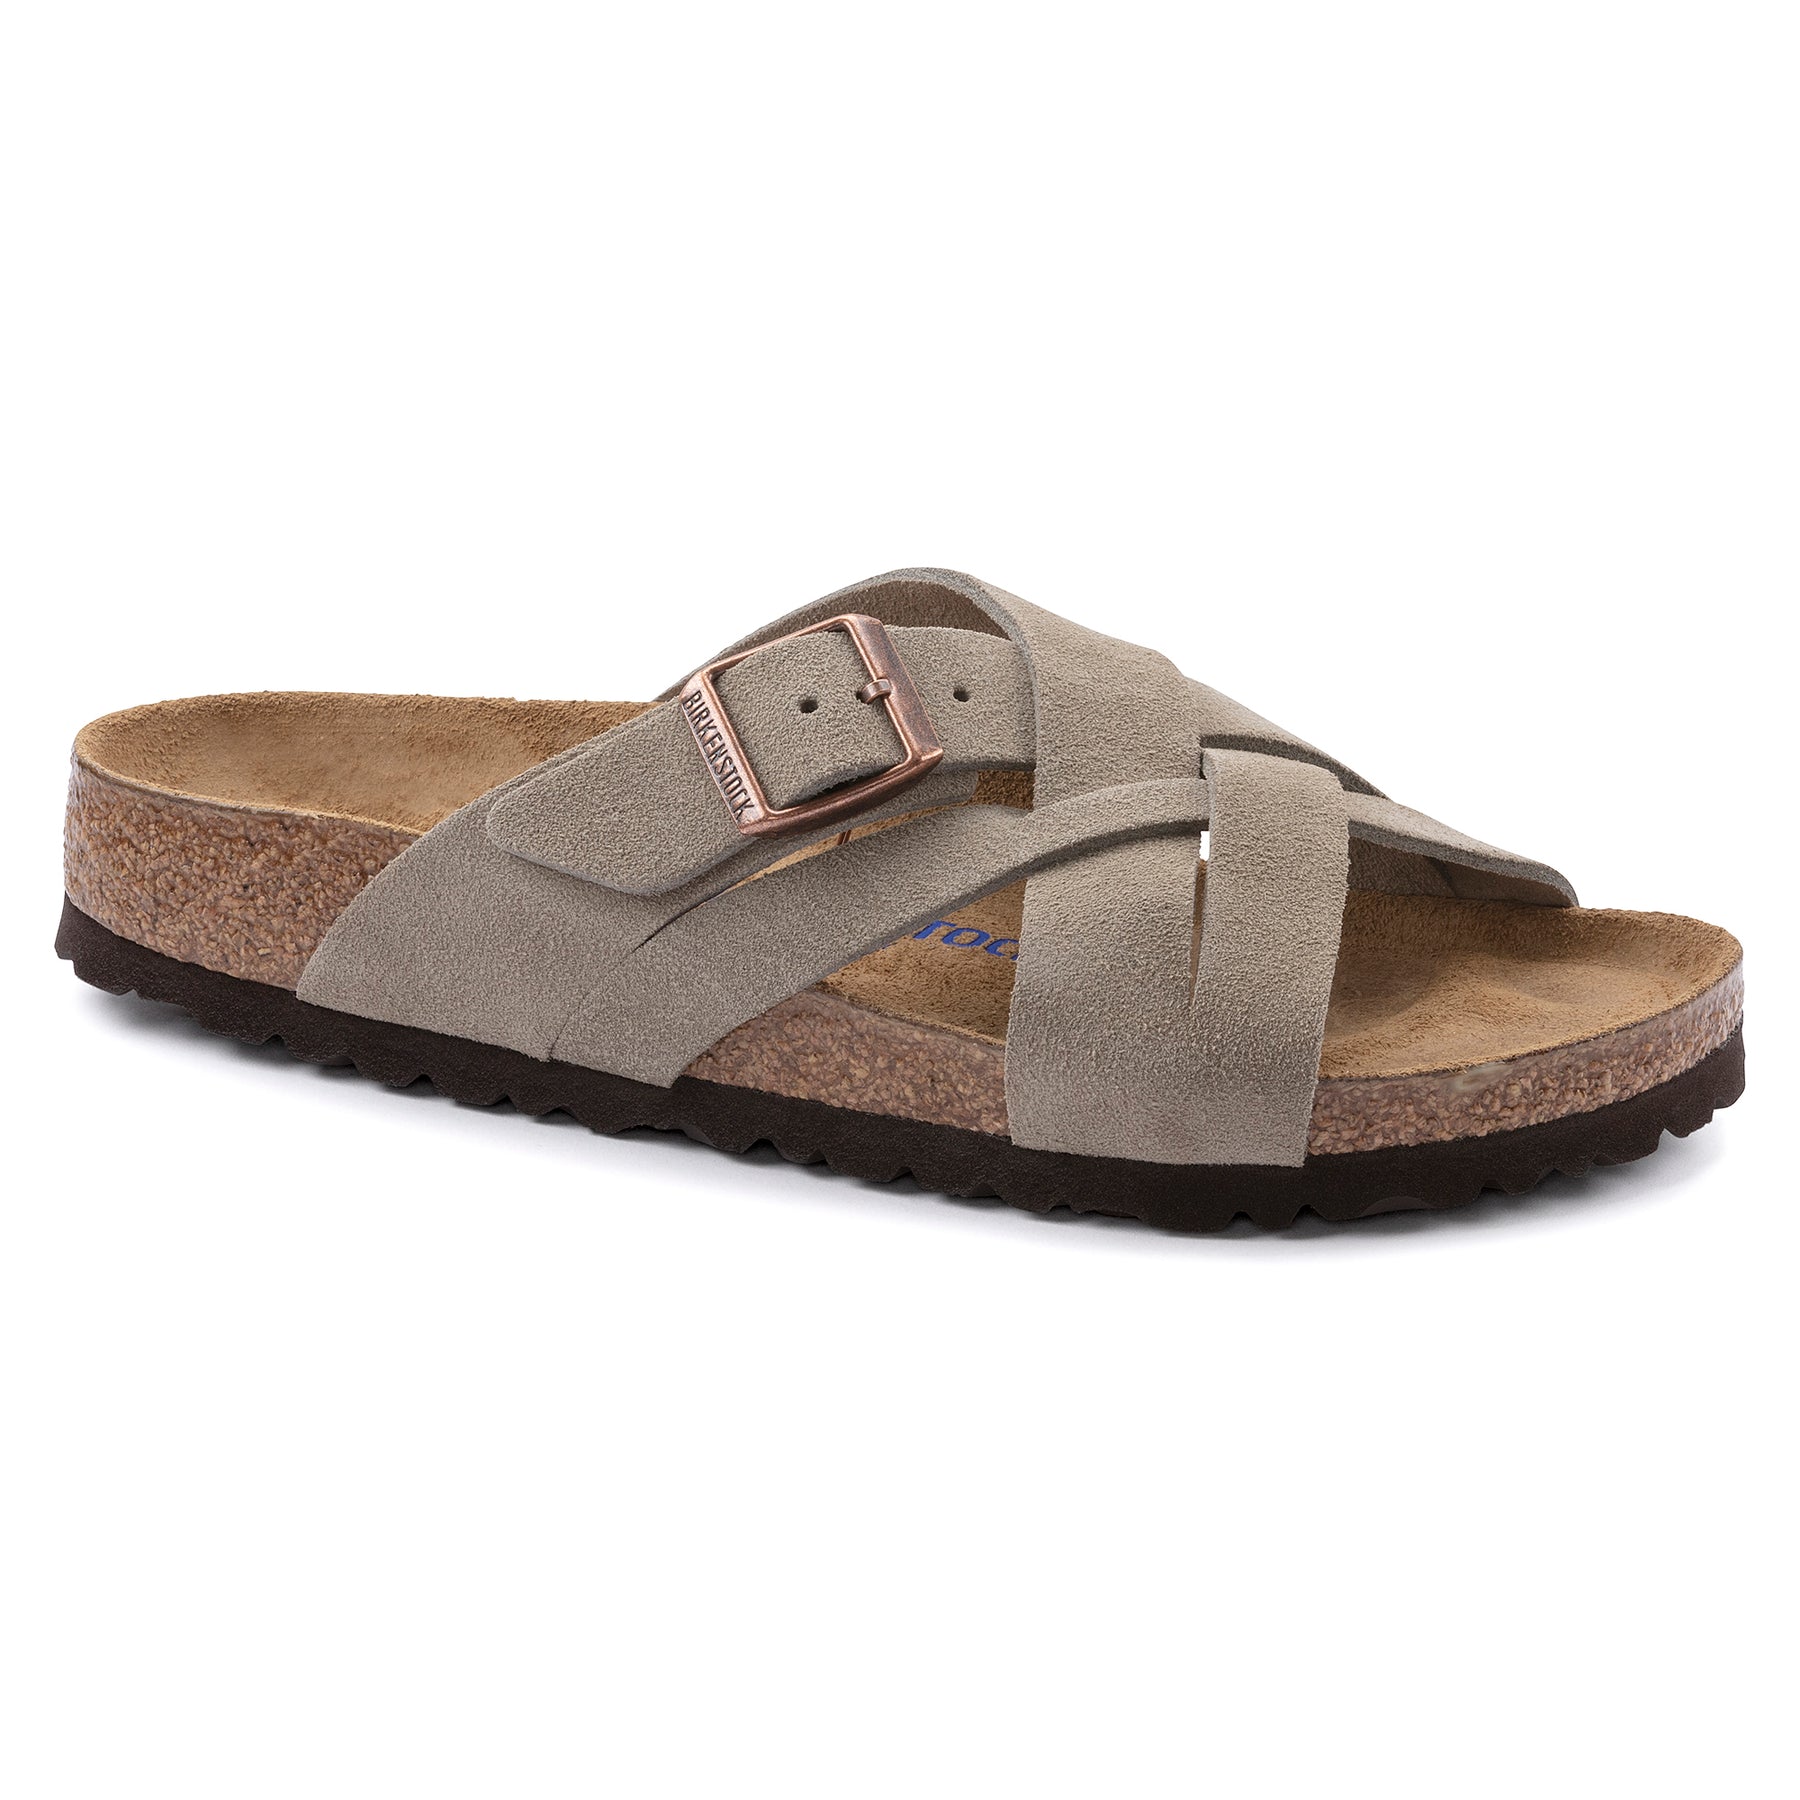 Birkenstock Limited Edition Lugano Soft Footbed taupe suede